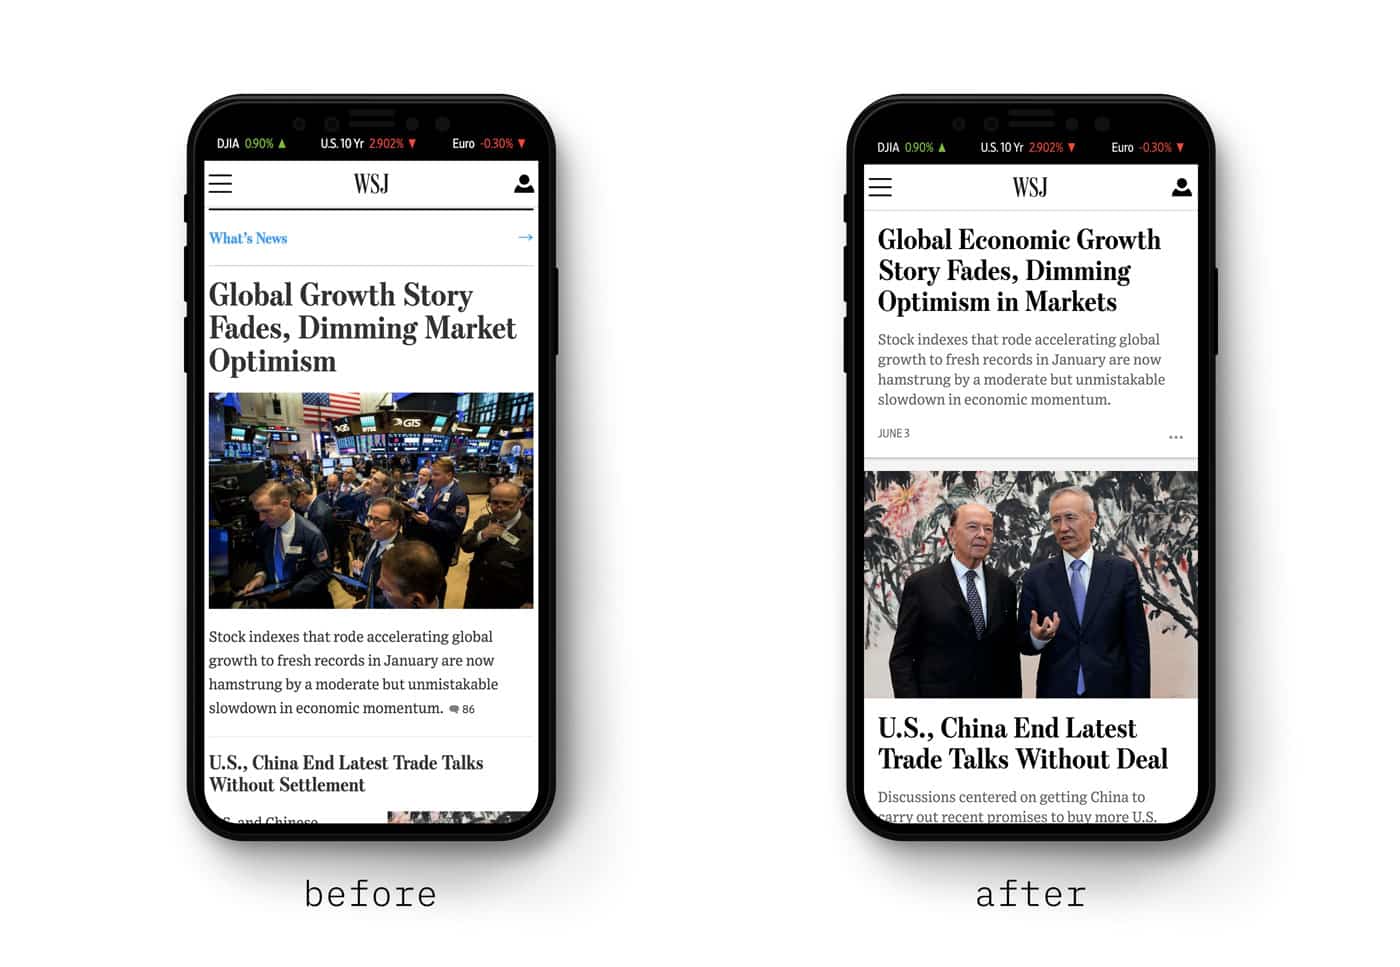 The WSJ.com mobile homepage before and after the re-design